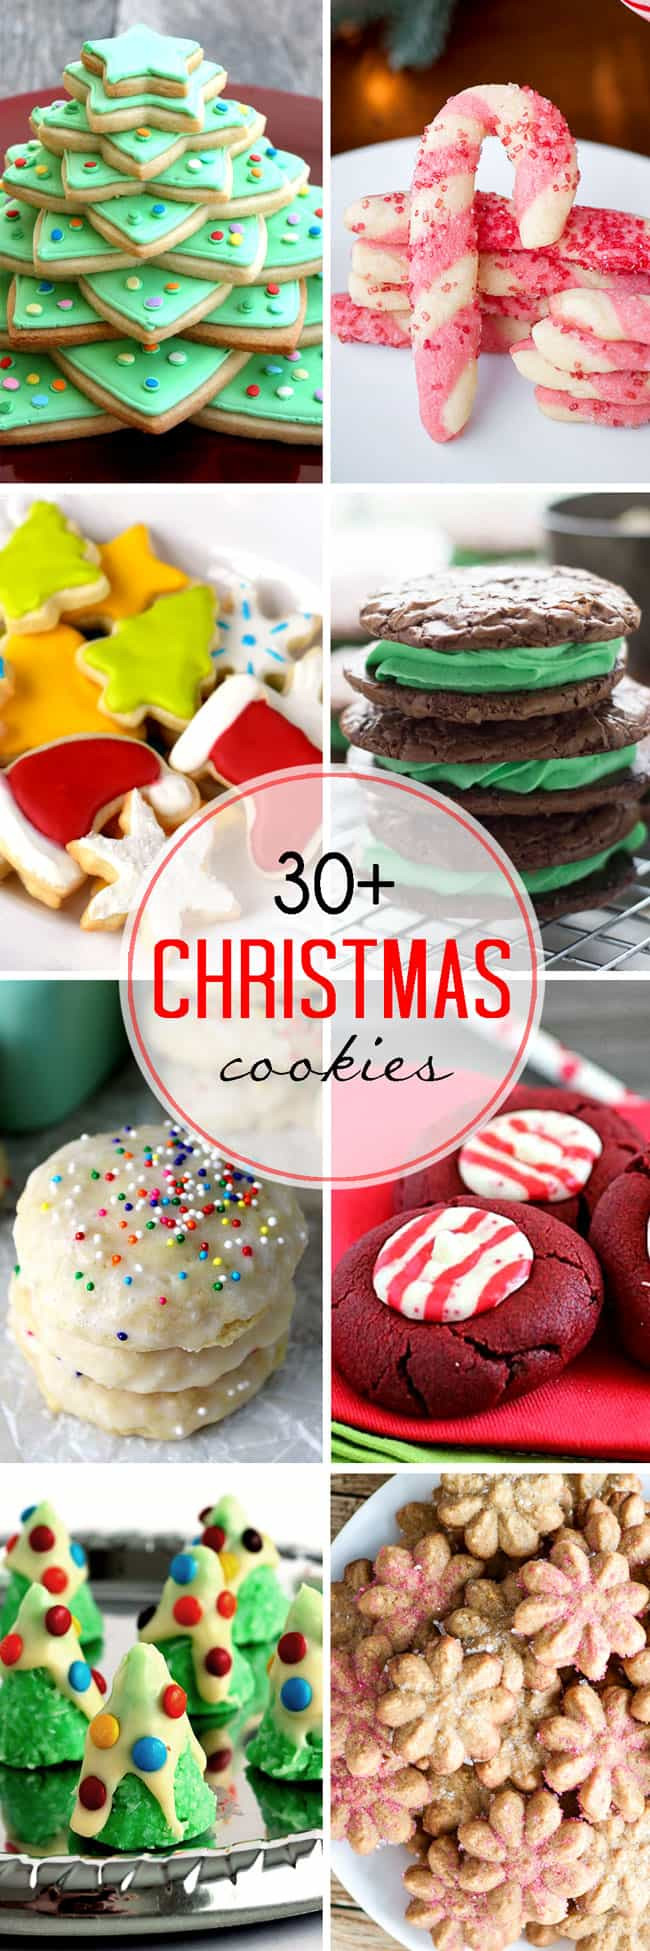 Christmas Baking Pinterest
 30 Christmas Cookies for your holiday baking